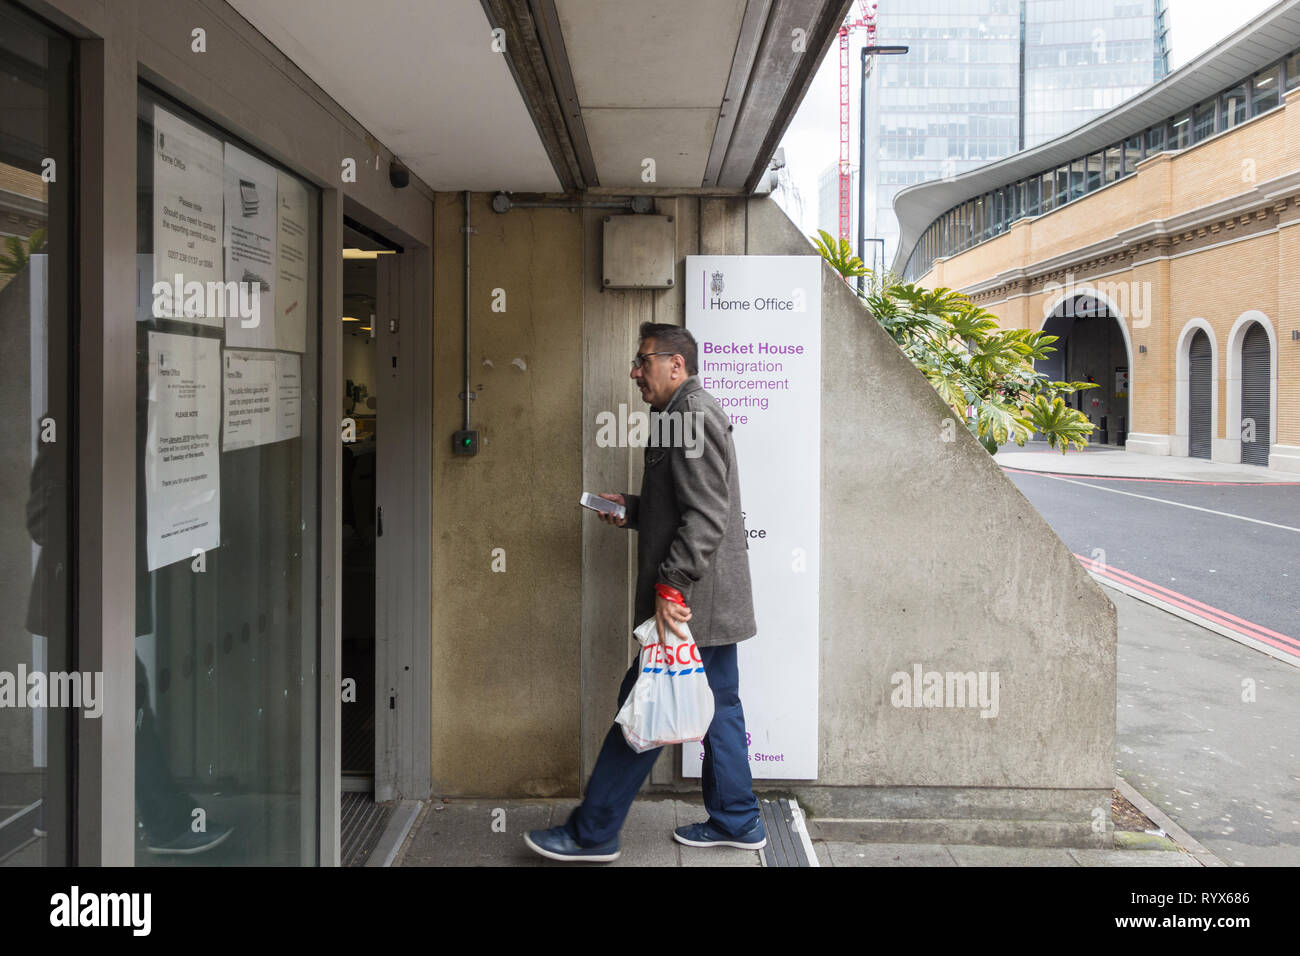 Public entrance to Becket House (Home Office), Immigration Enforcement Reporting Centre, St Thomas Street, Bermondsey, London, UK Stock Photo